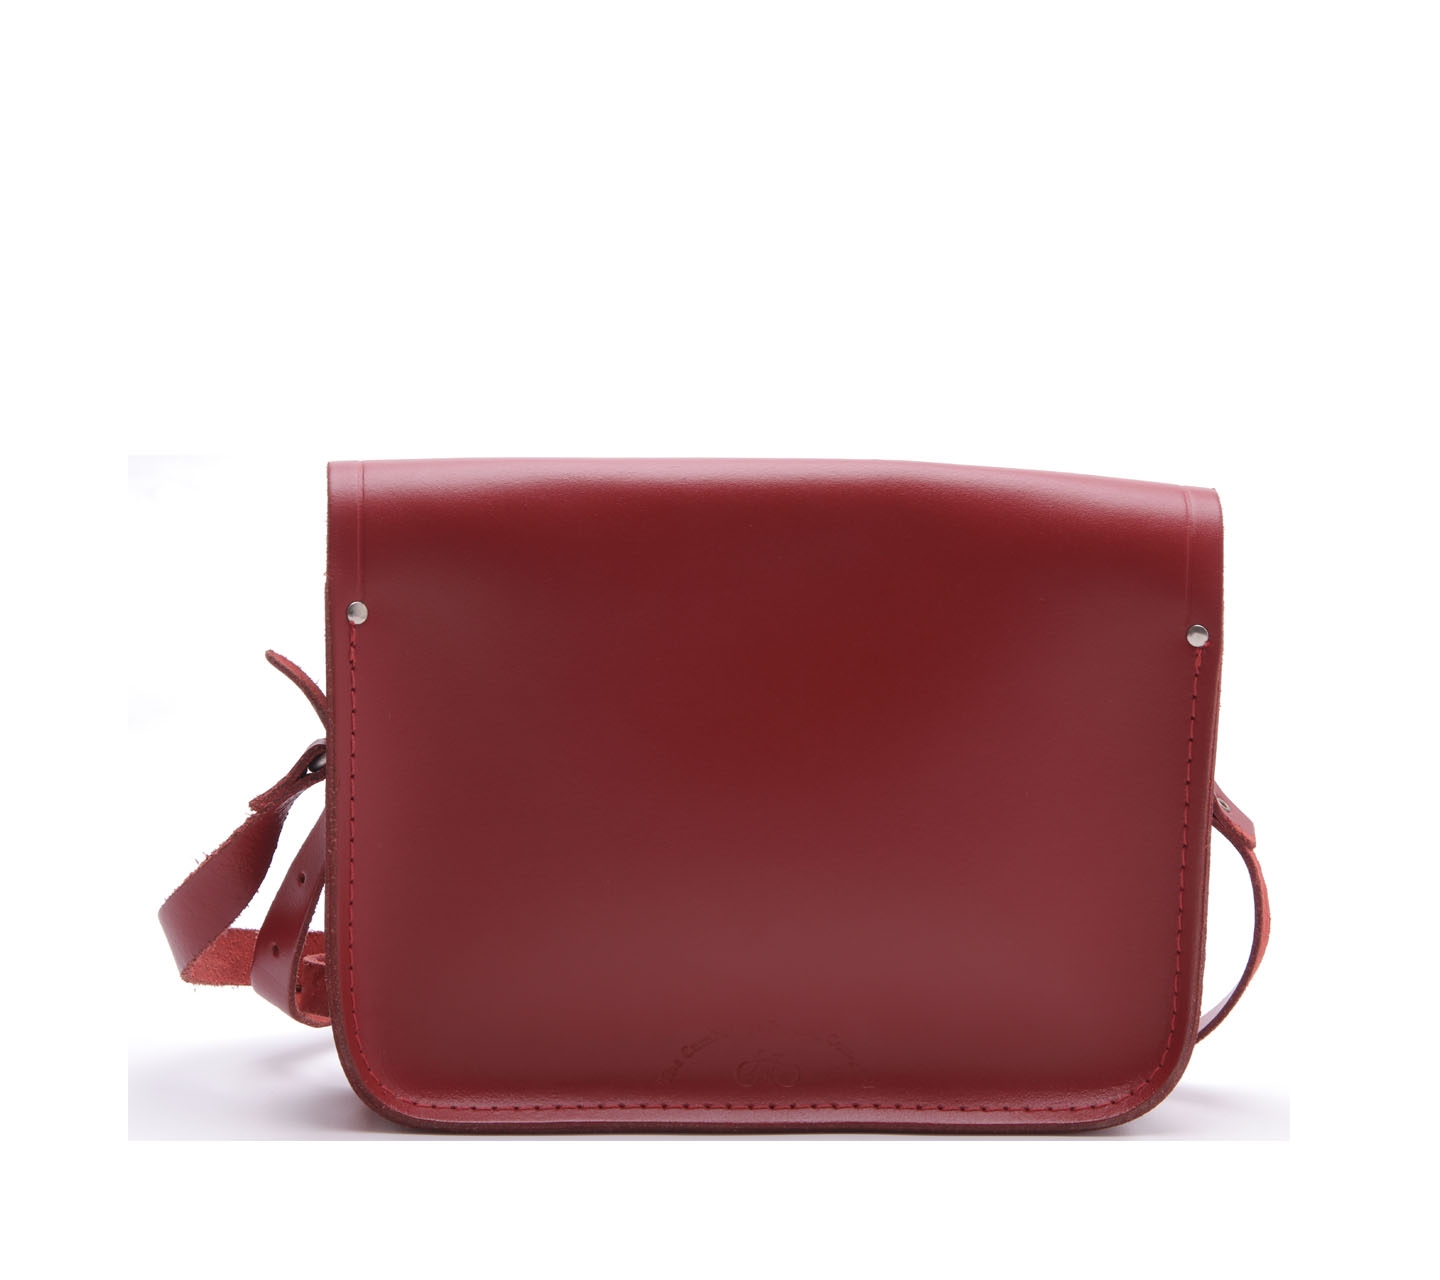 The cambridge satchel company Red Sling Bag